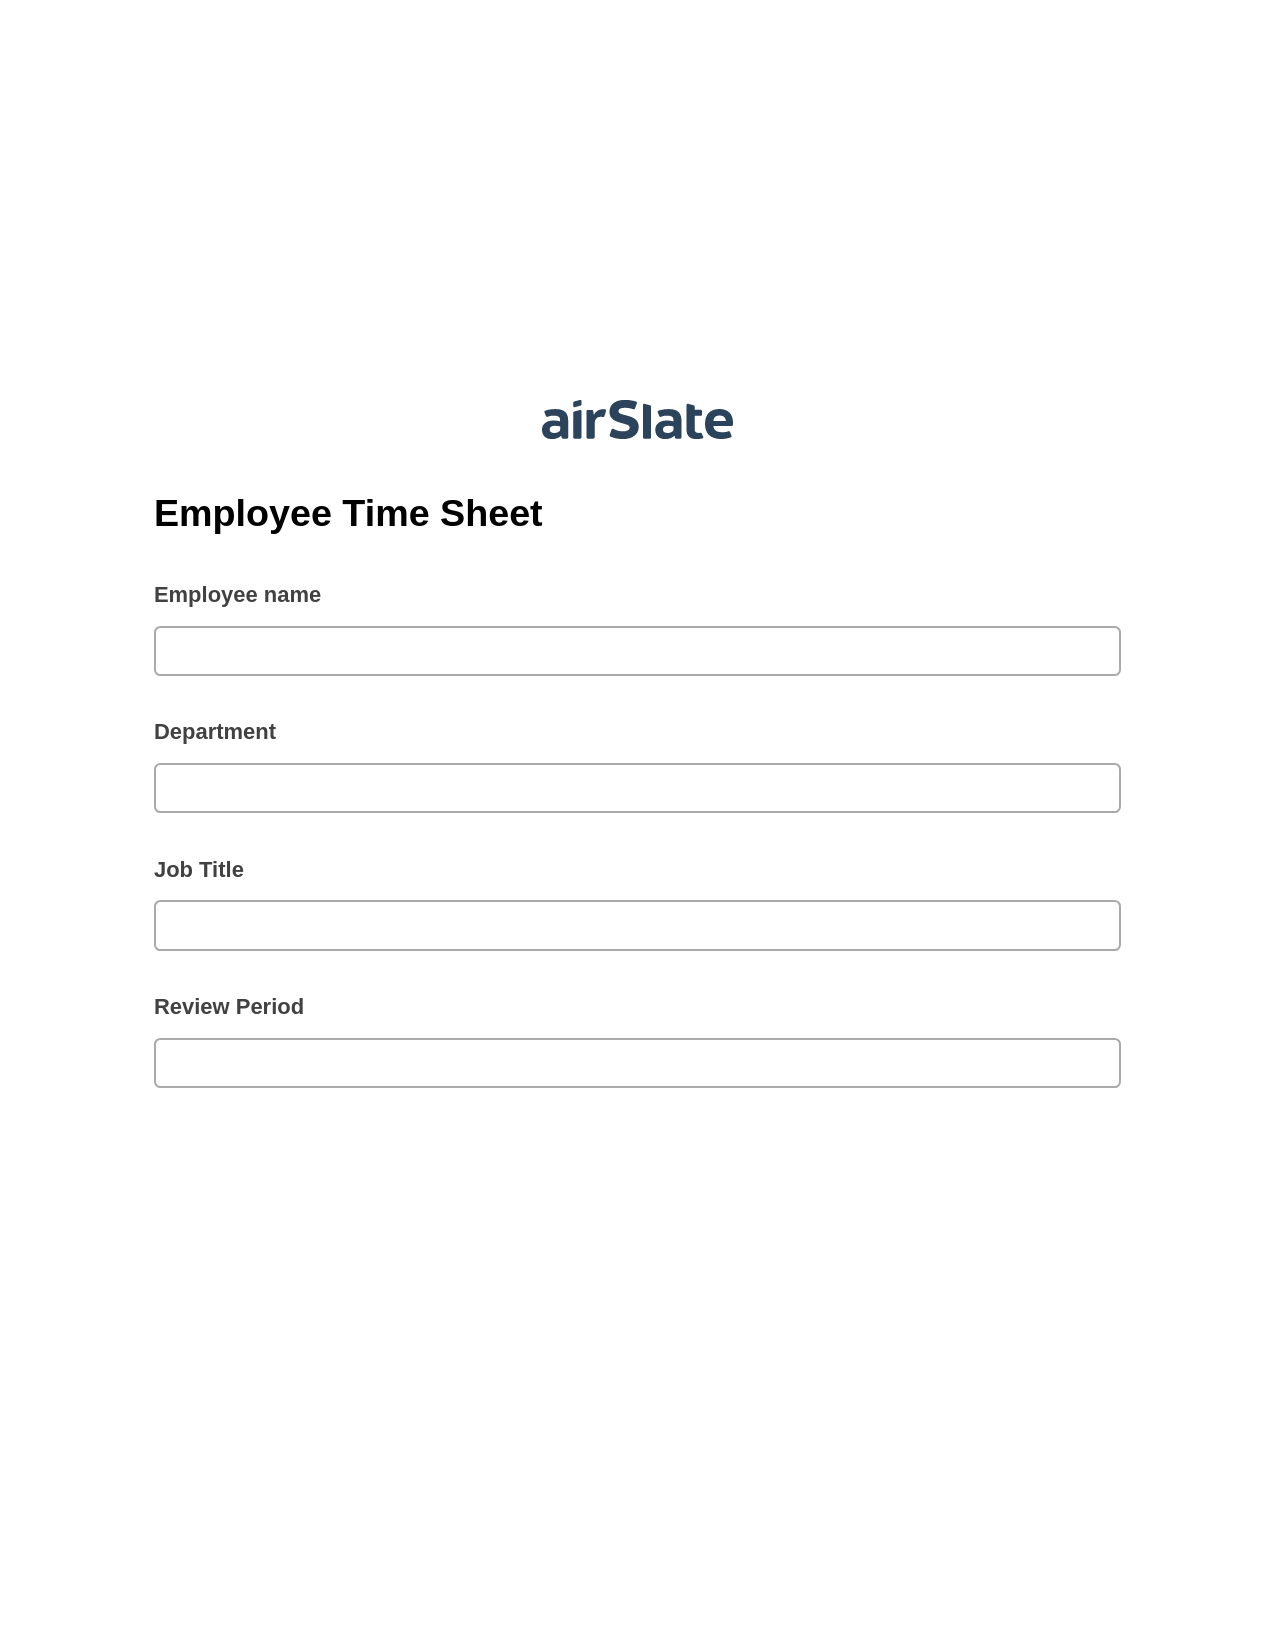 Employee Time Sheet Pre-fill Document Bot, Update Audit Trail Bot, Export to Excel 365 Bot